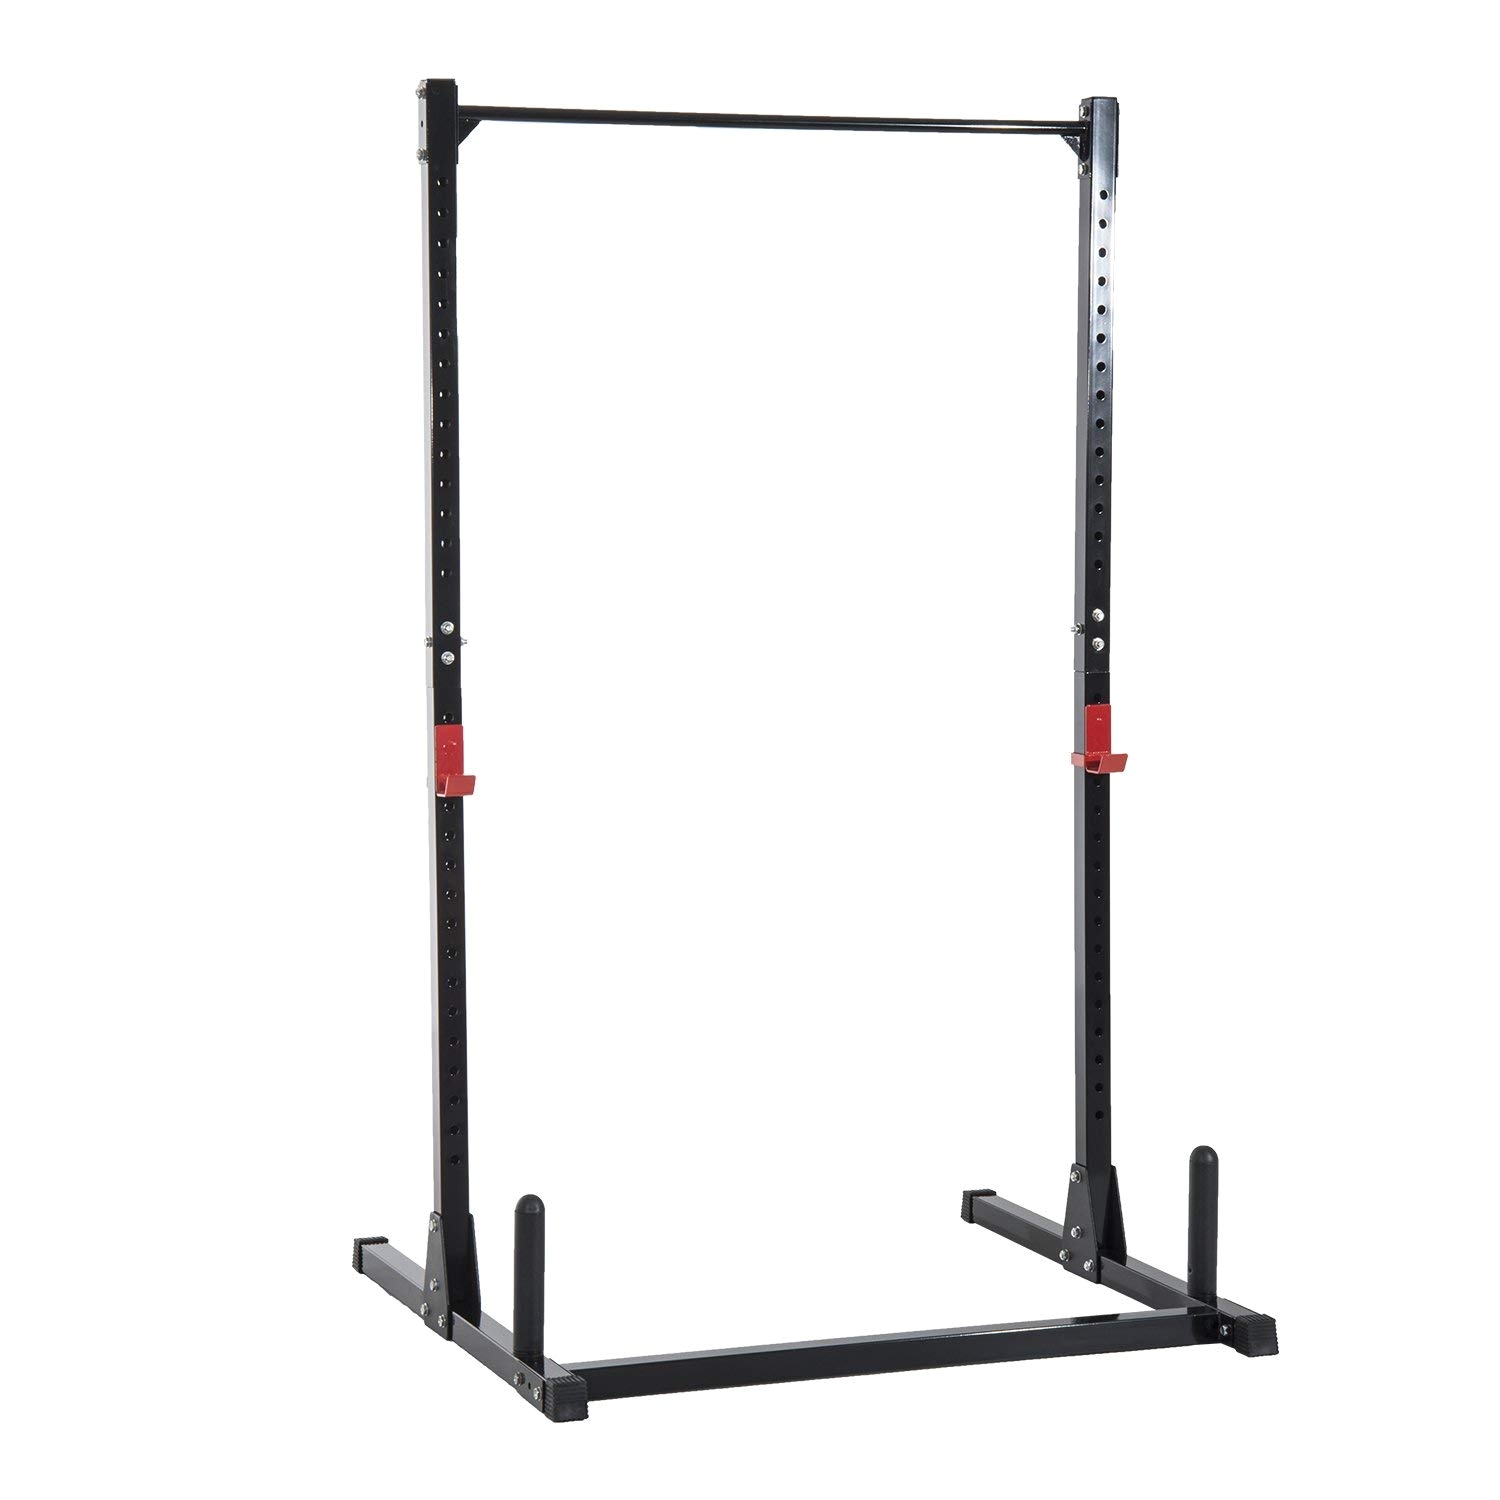 Cap Barbell Power Rack Exercise Stand Review Amazon Com soozier Adjustable Power Rack Exercise Stand Black